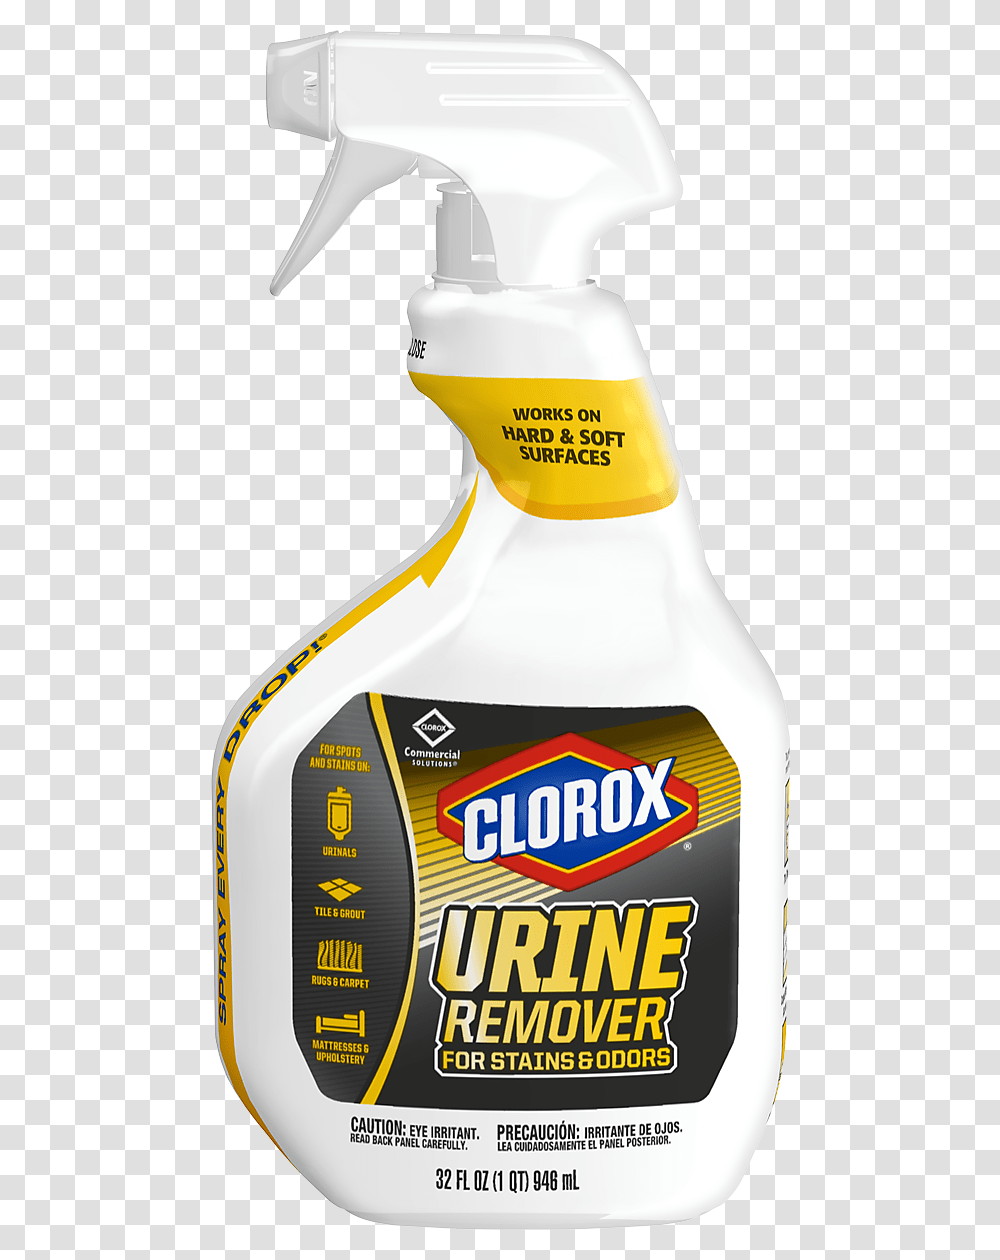 Enzymatic Cleaner Urine Remover Clorox Professional, Label, Bottle, Mixer Transparent Png